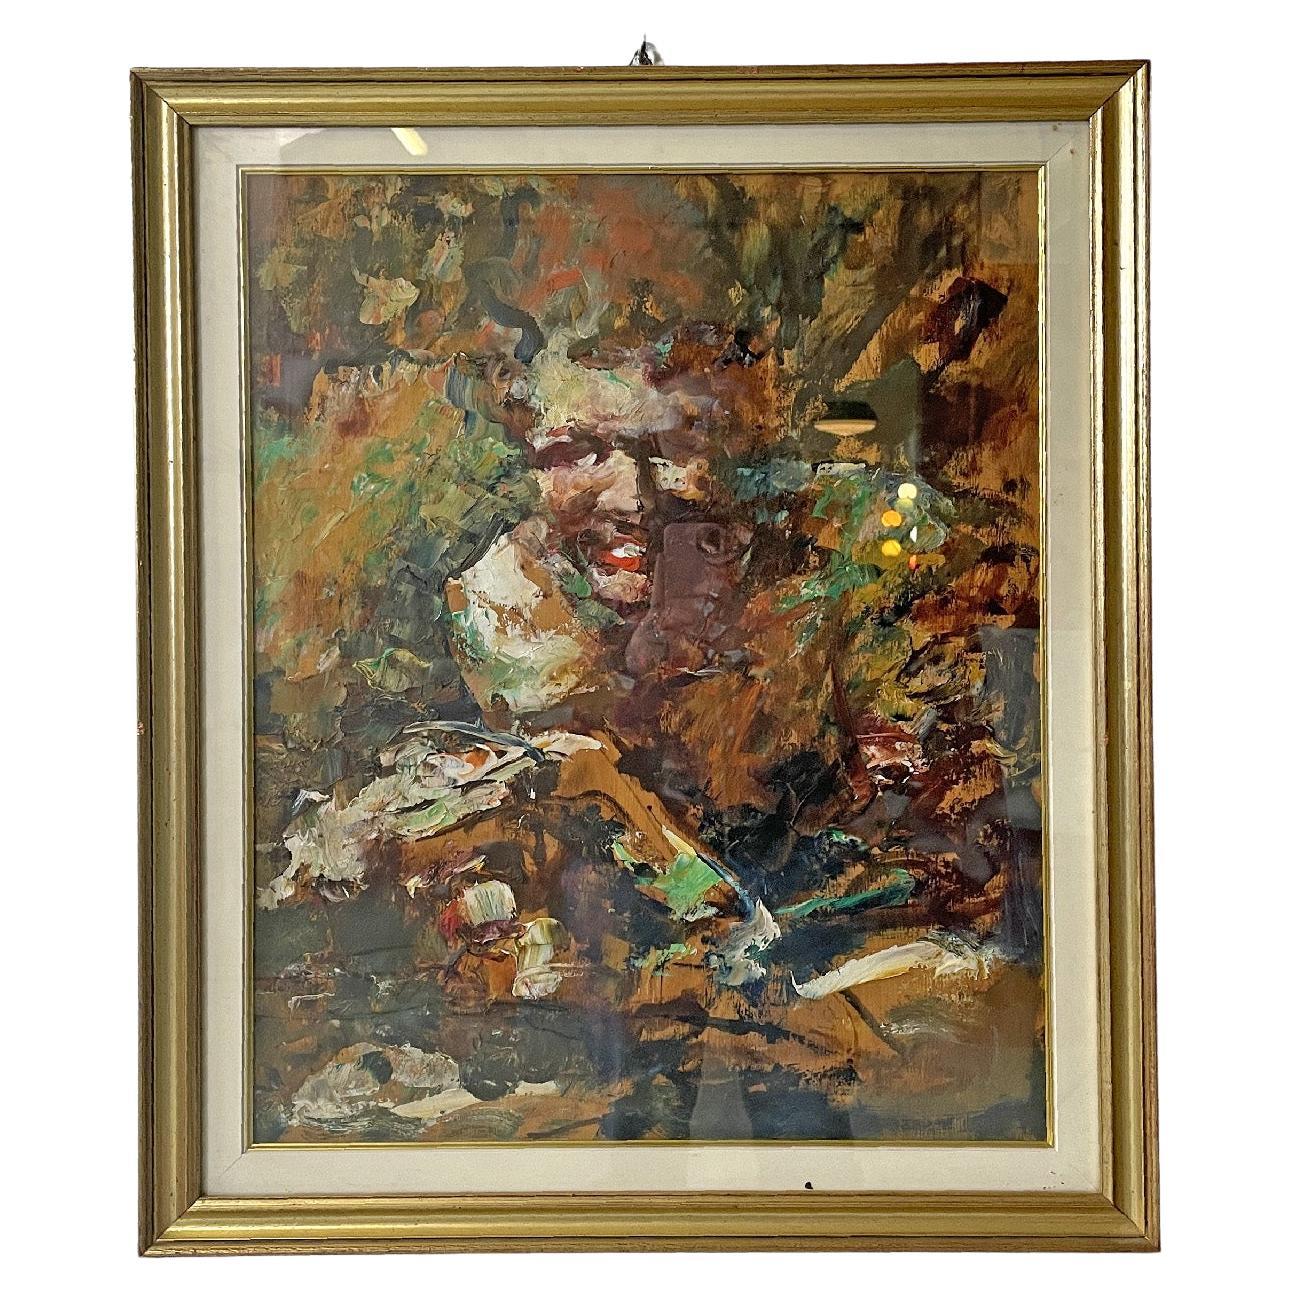 Italian mid-century modern abstract portrait painting with golden frame, 1960s